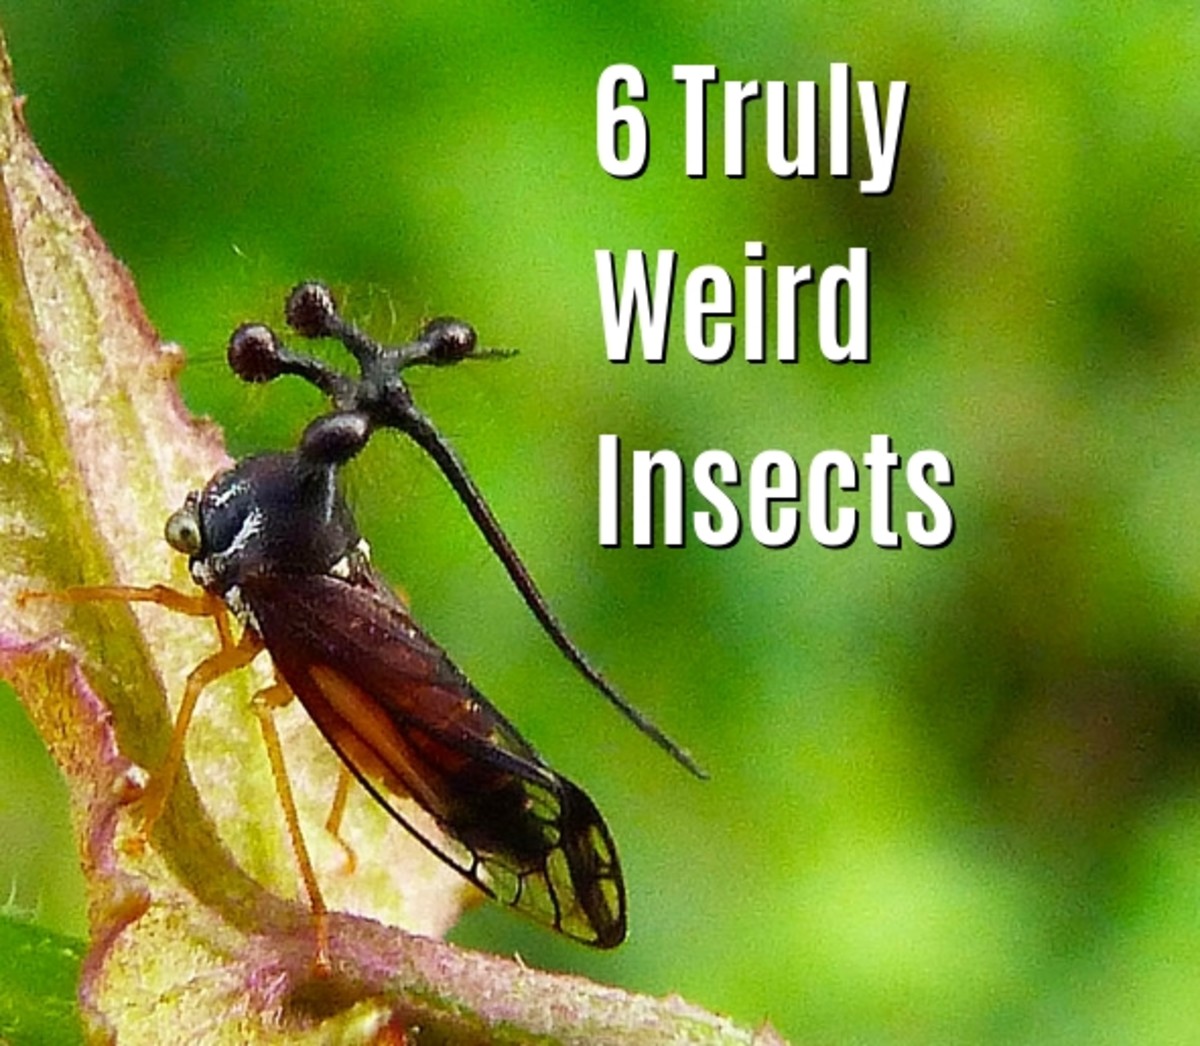 6 Extremely Weird Insects (With Photos)